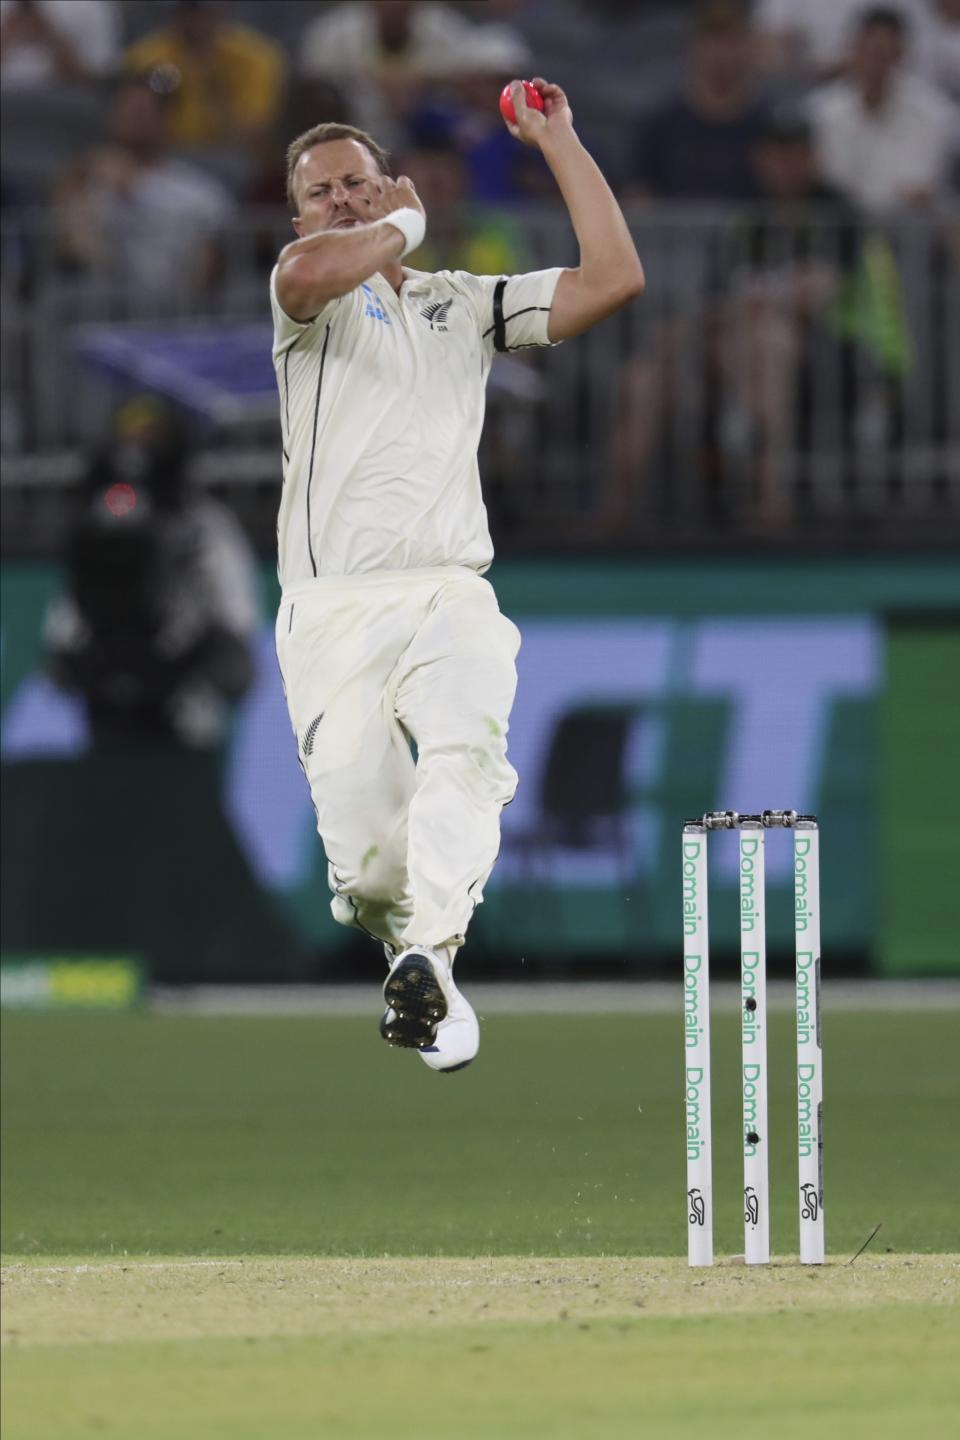 New Zealand's Neil Wagner bowls during play in their cricket test against Australia, in Perth, Australia, Thursday, Dec. 12, 2019. (AP Photo/Trevor Collens)